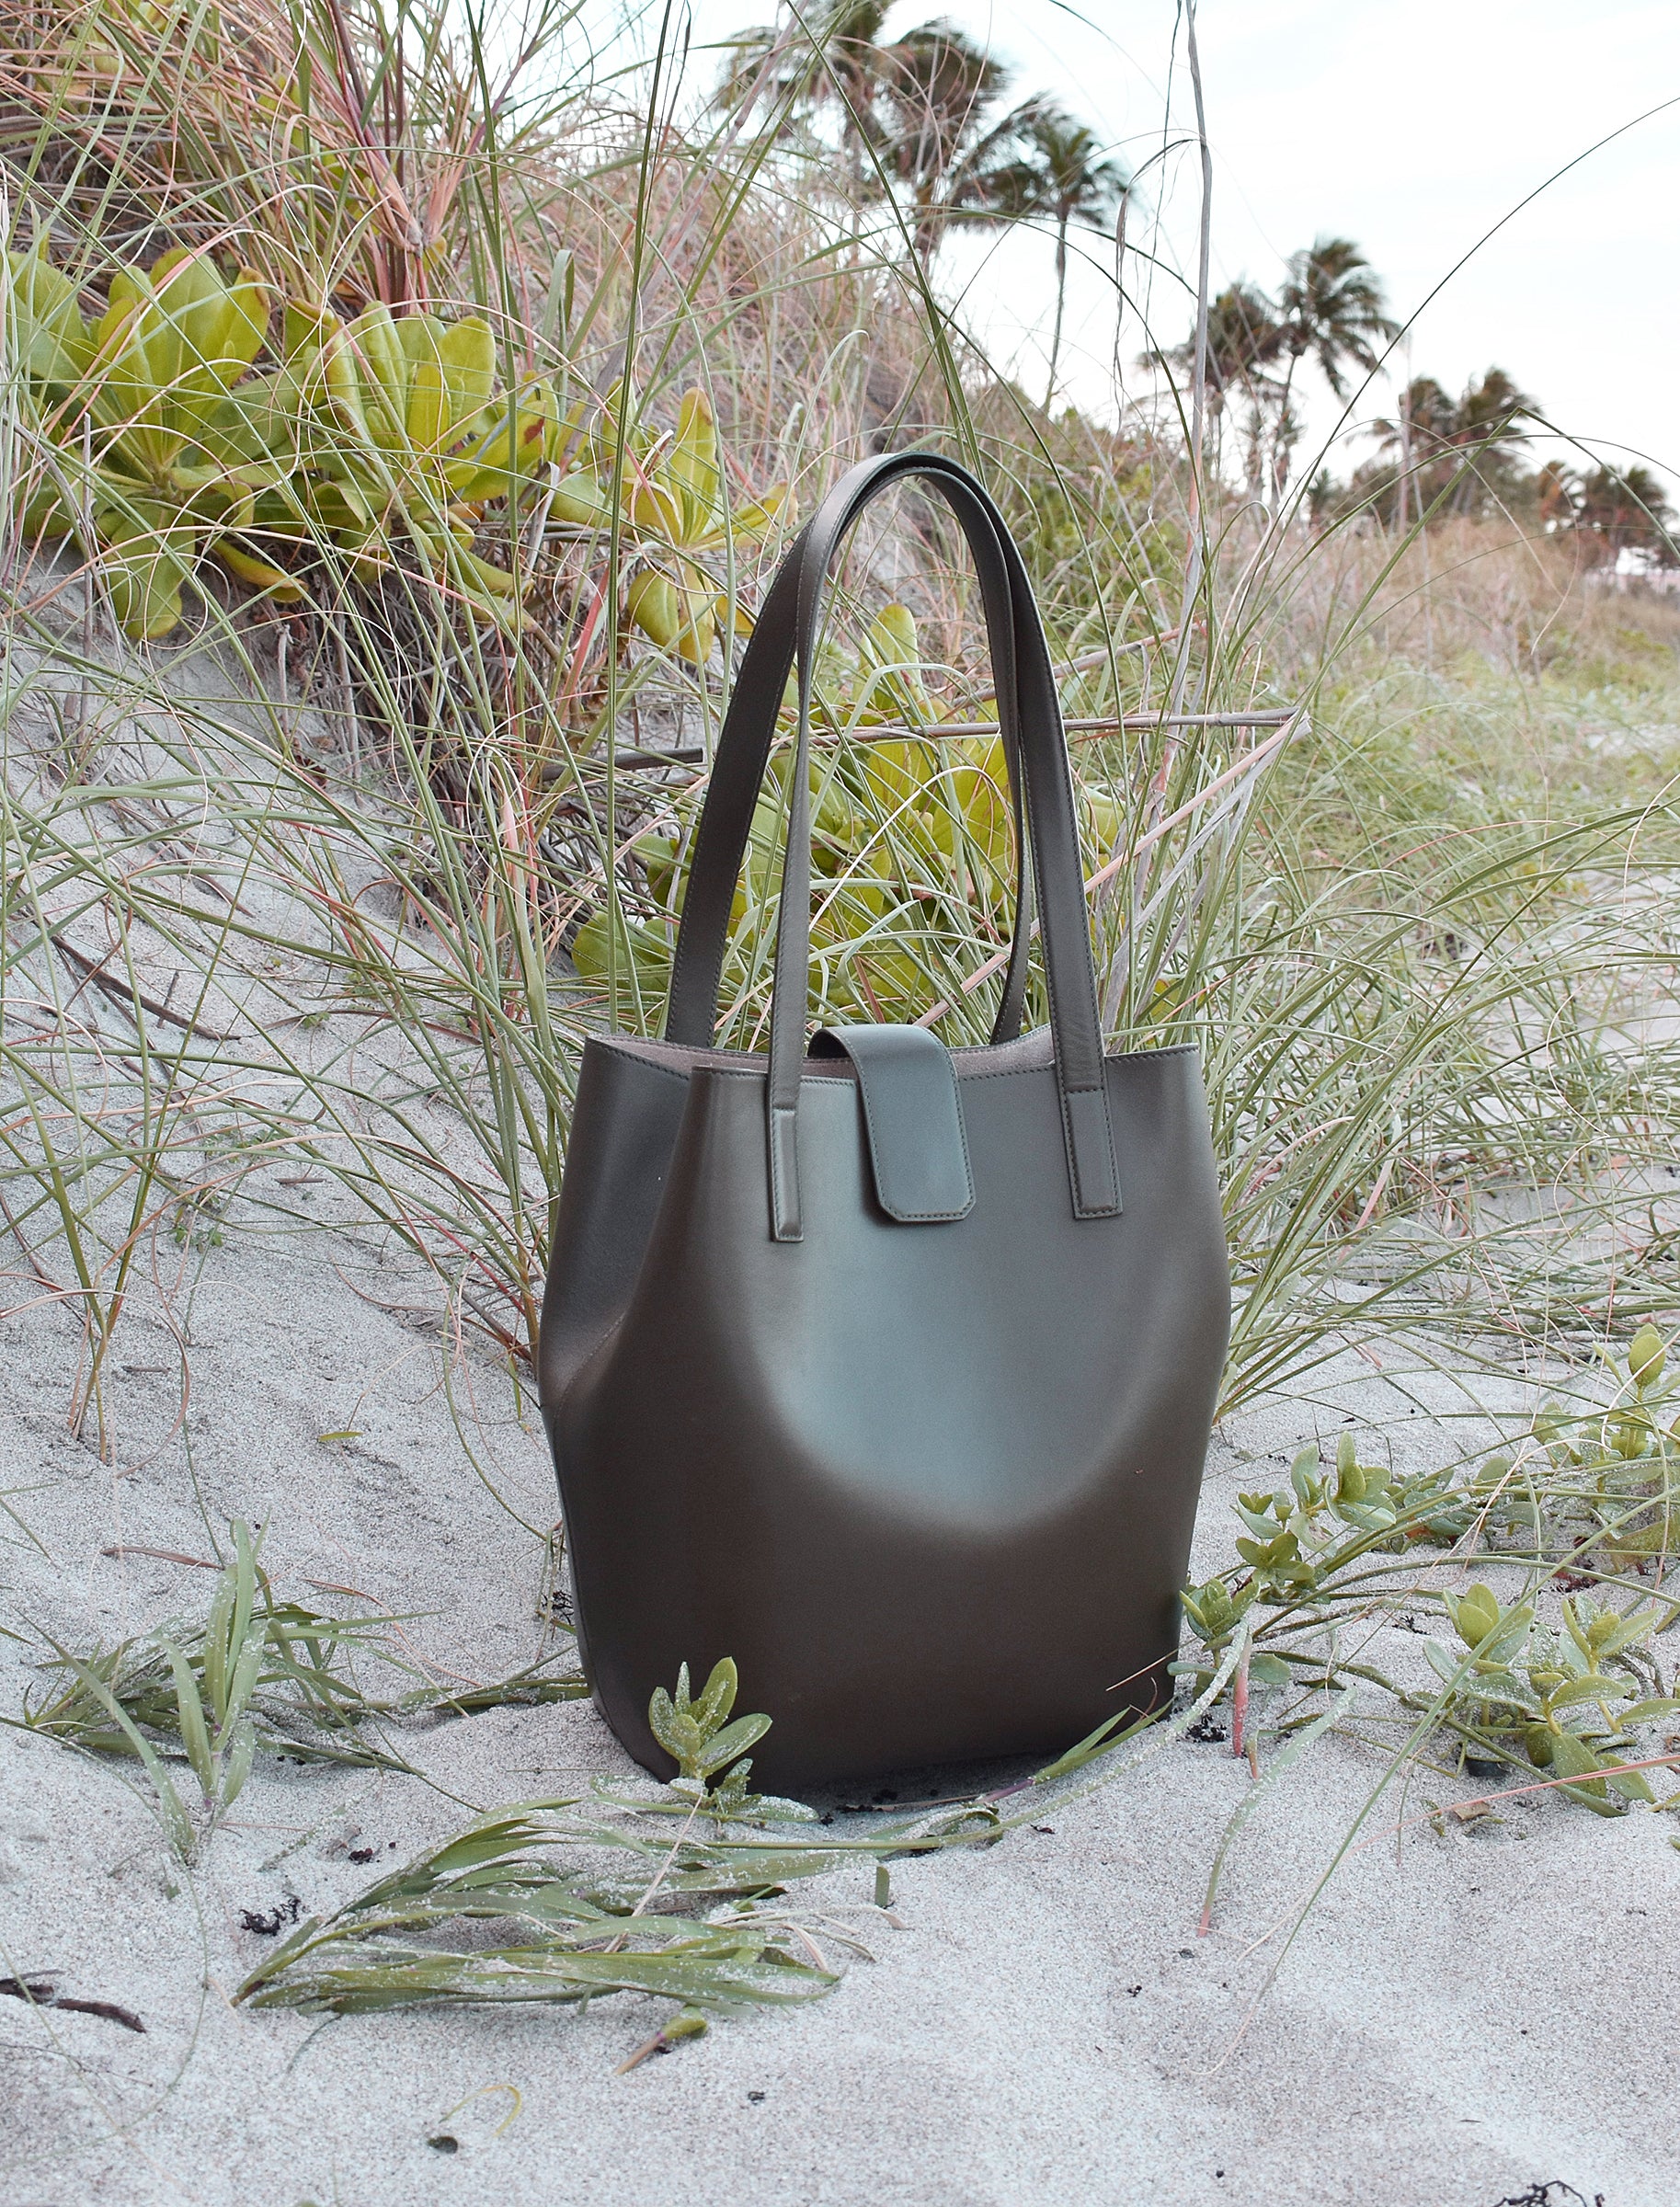 Military green luxury bag Made in Italy Supports the Environment Minimalist Style Shoulder Bag in the Dunes in West Palm Beach